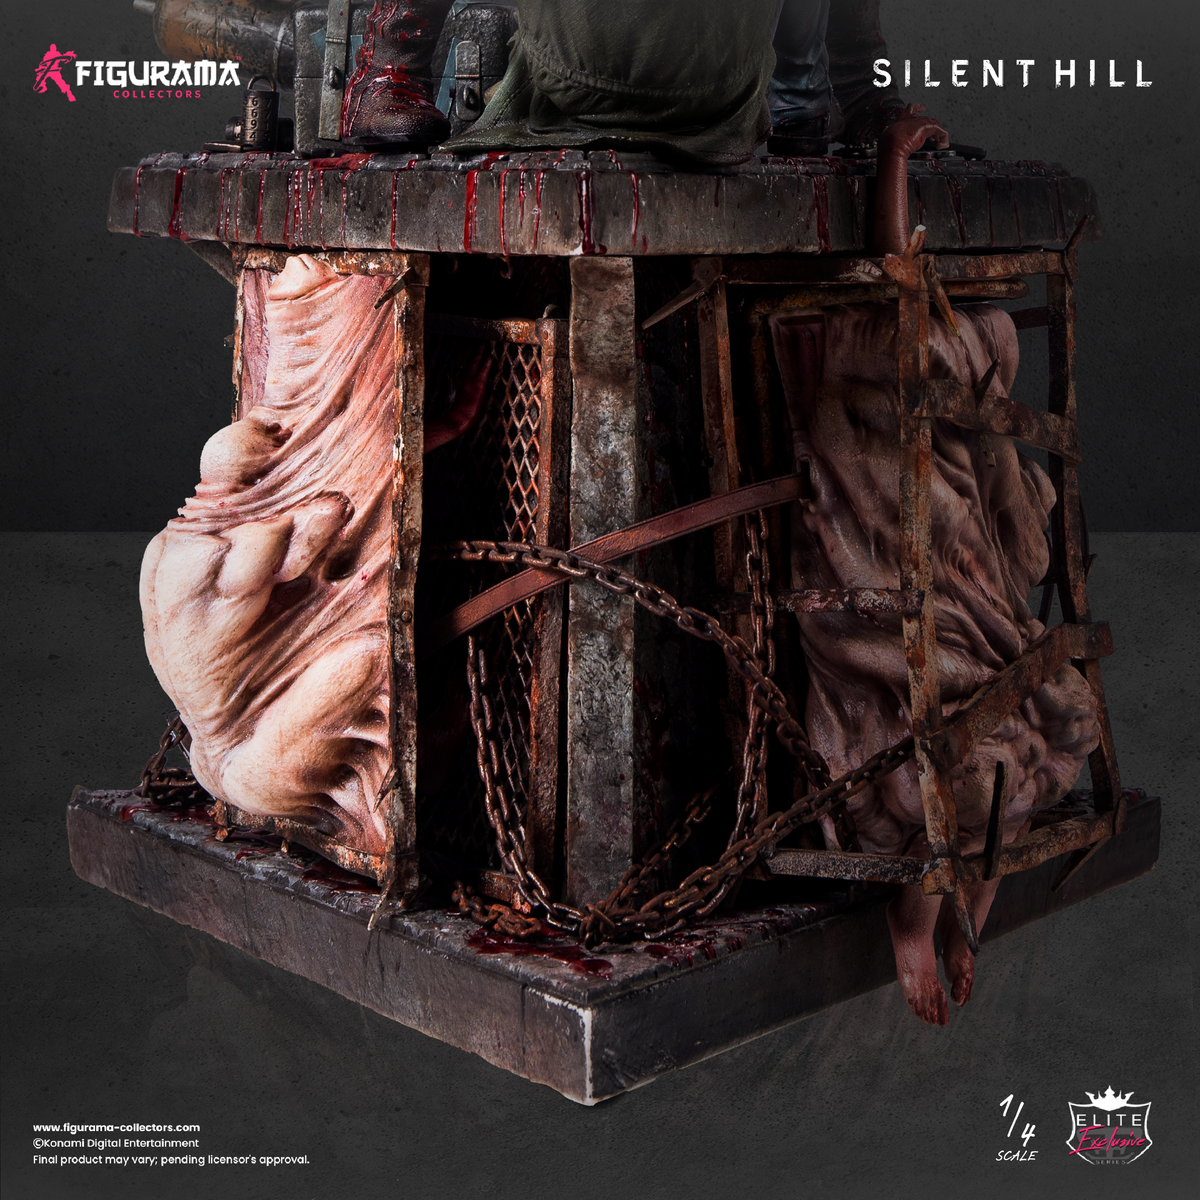 Someone Bought The Silent Hill.com Domain To Post A Photo Of Pyramid Head  Showing He's 9ft Tall